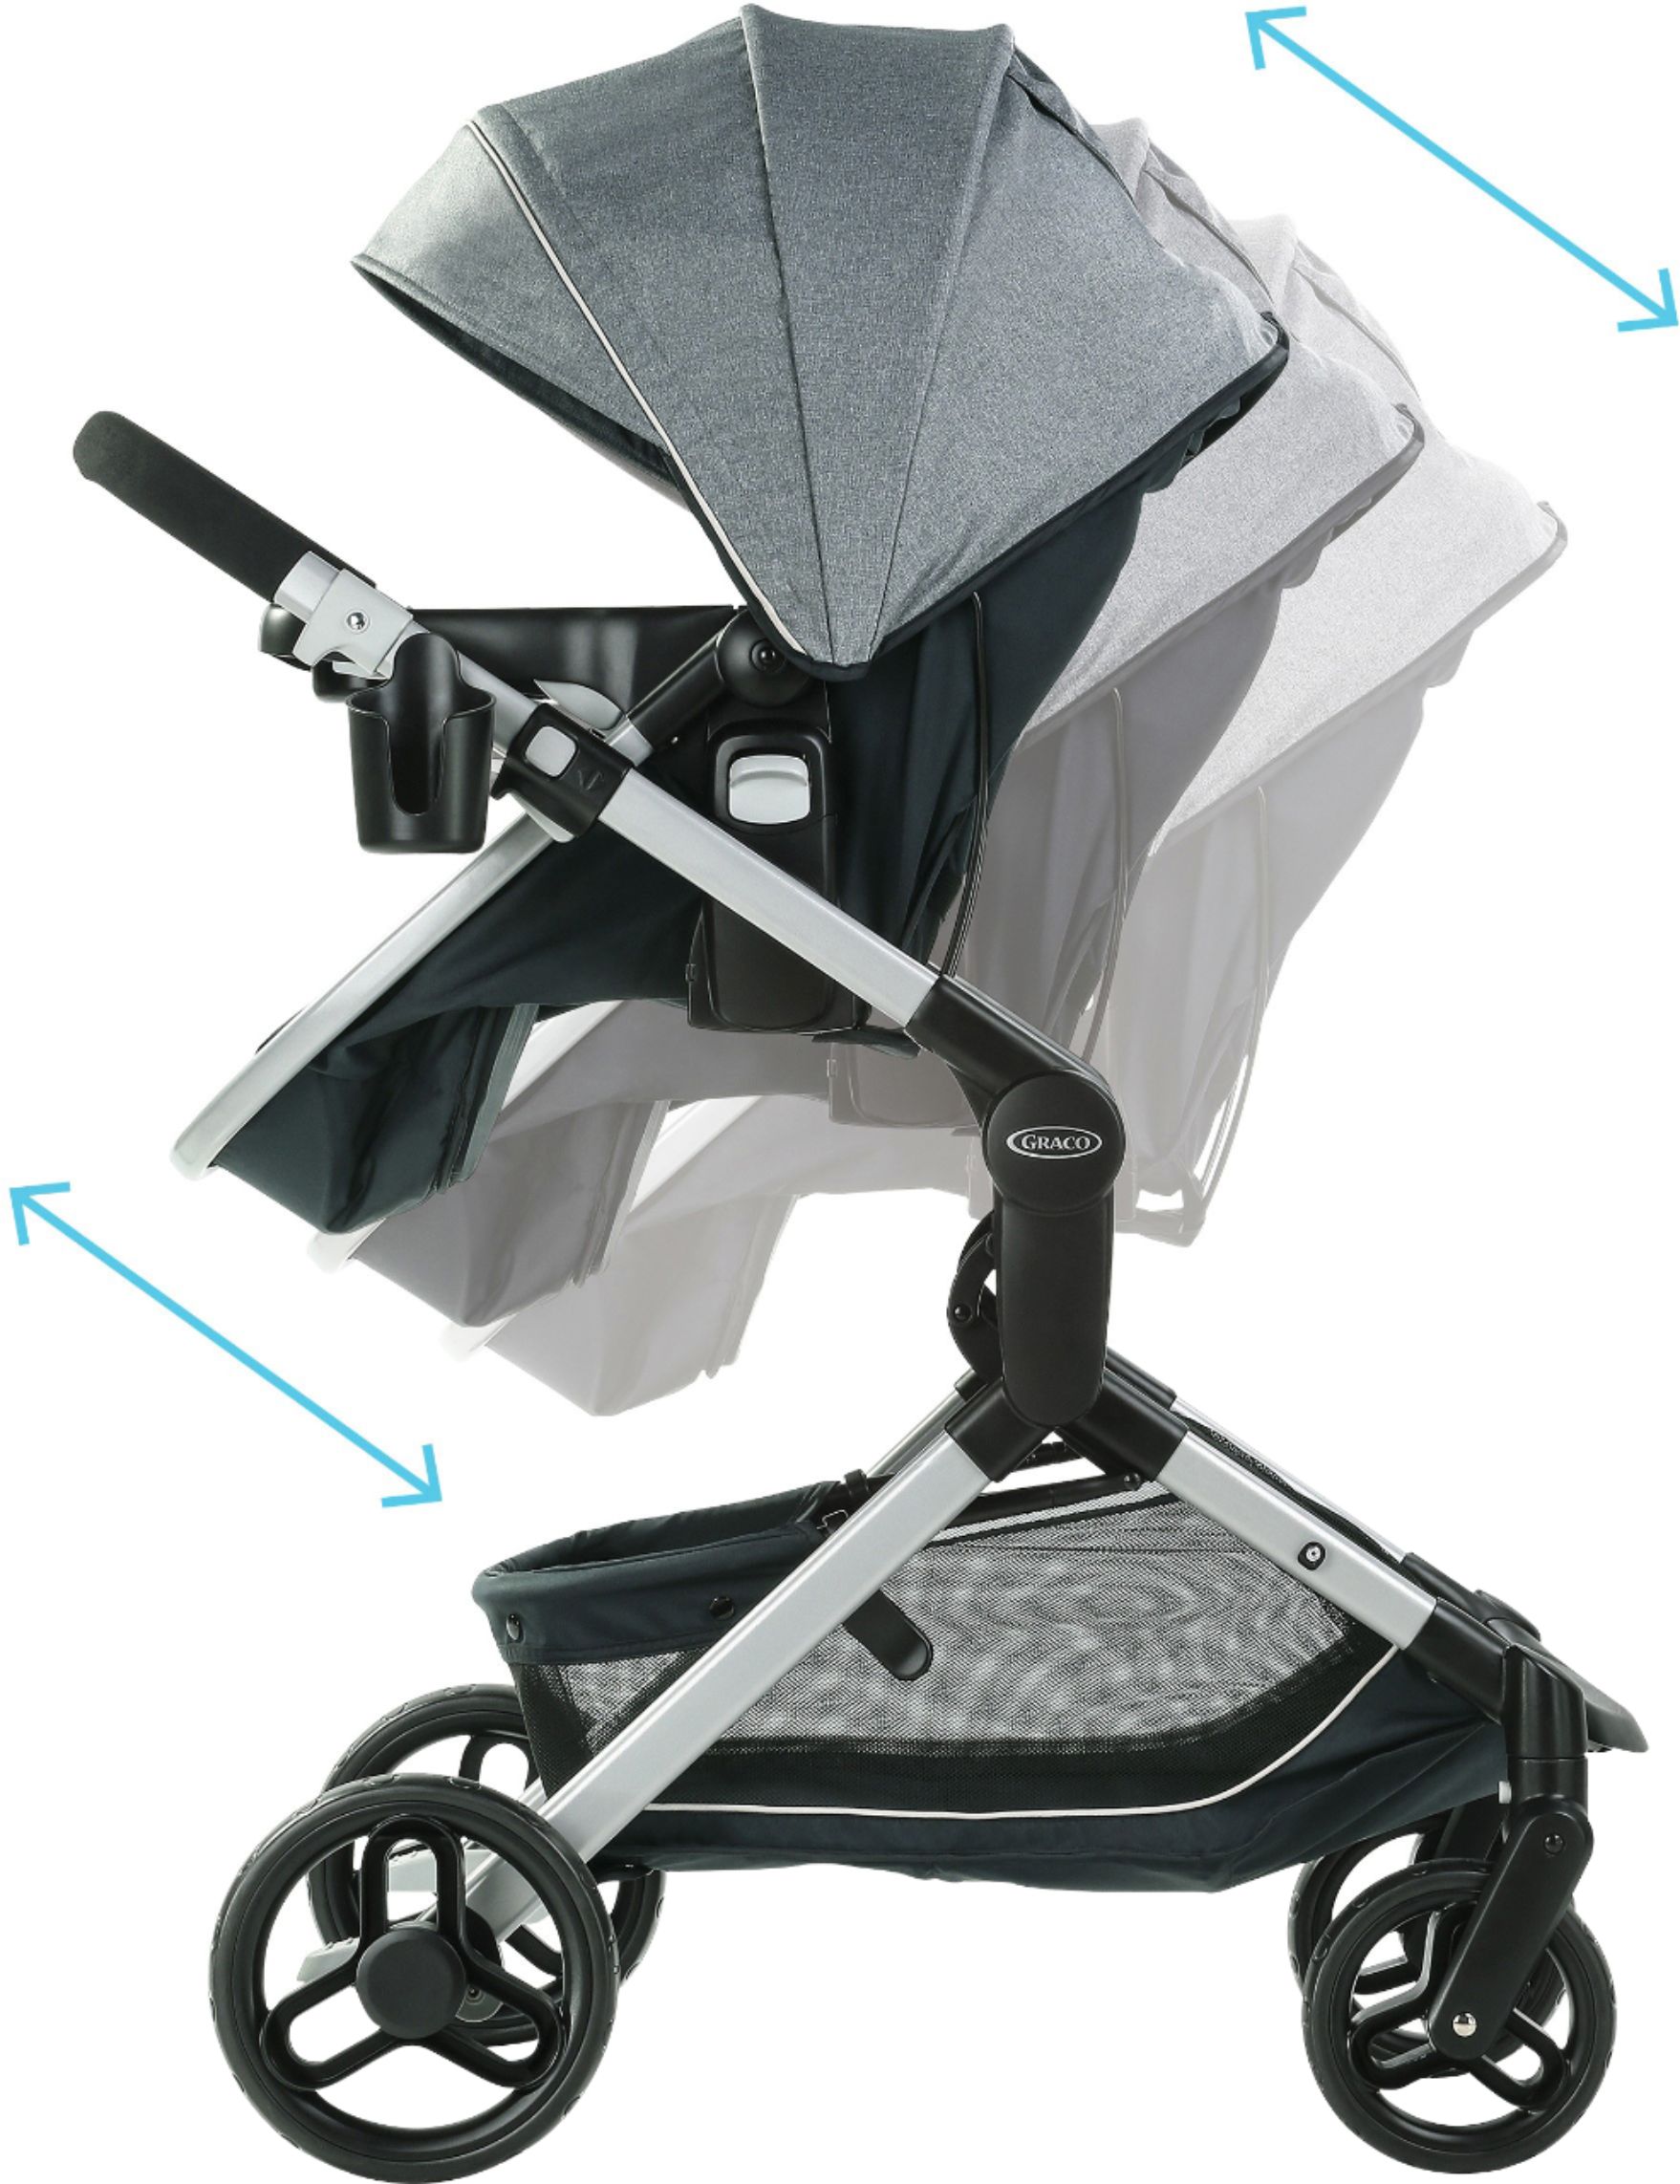 Angle View: Graco - Modes™ Nest Stroller - Spencer